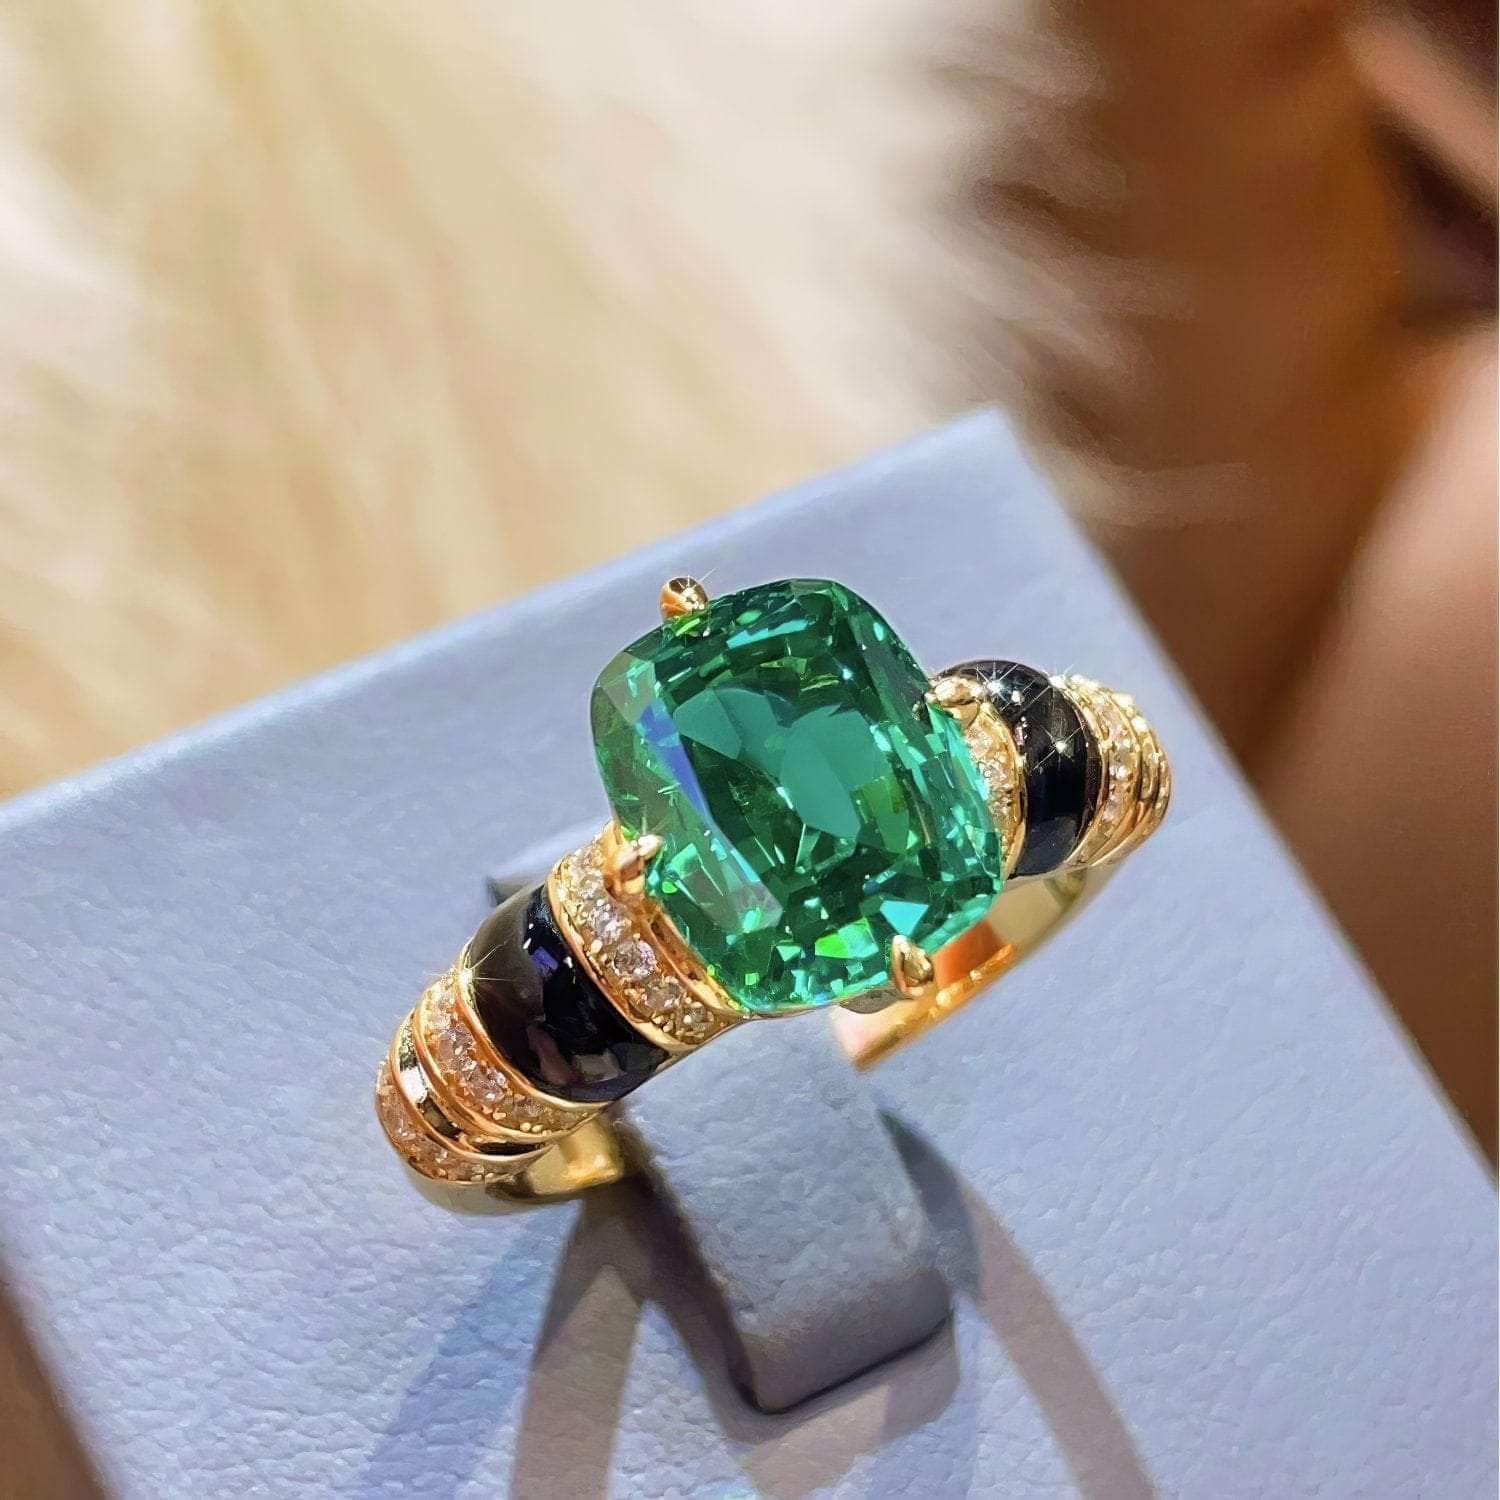 14k Gold Two-Toned Paved Crystal Bezel-Setting Lab-Grown Emerald Ring 5 US / Emerald